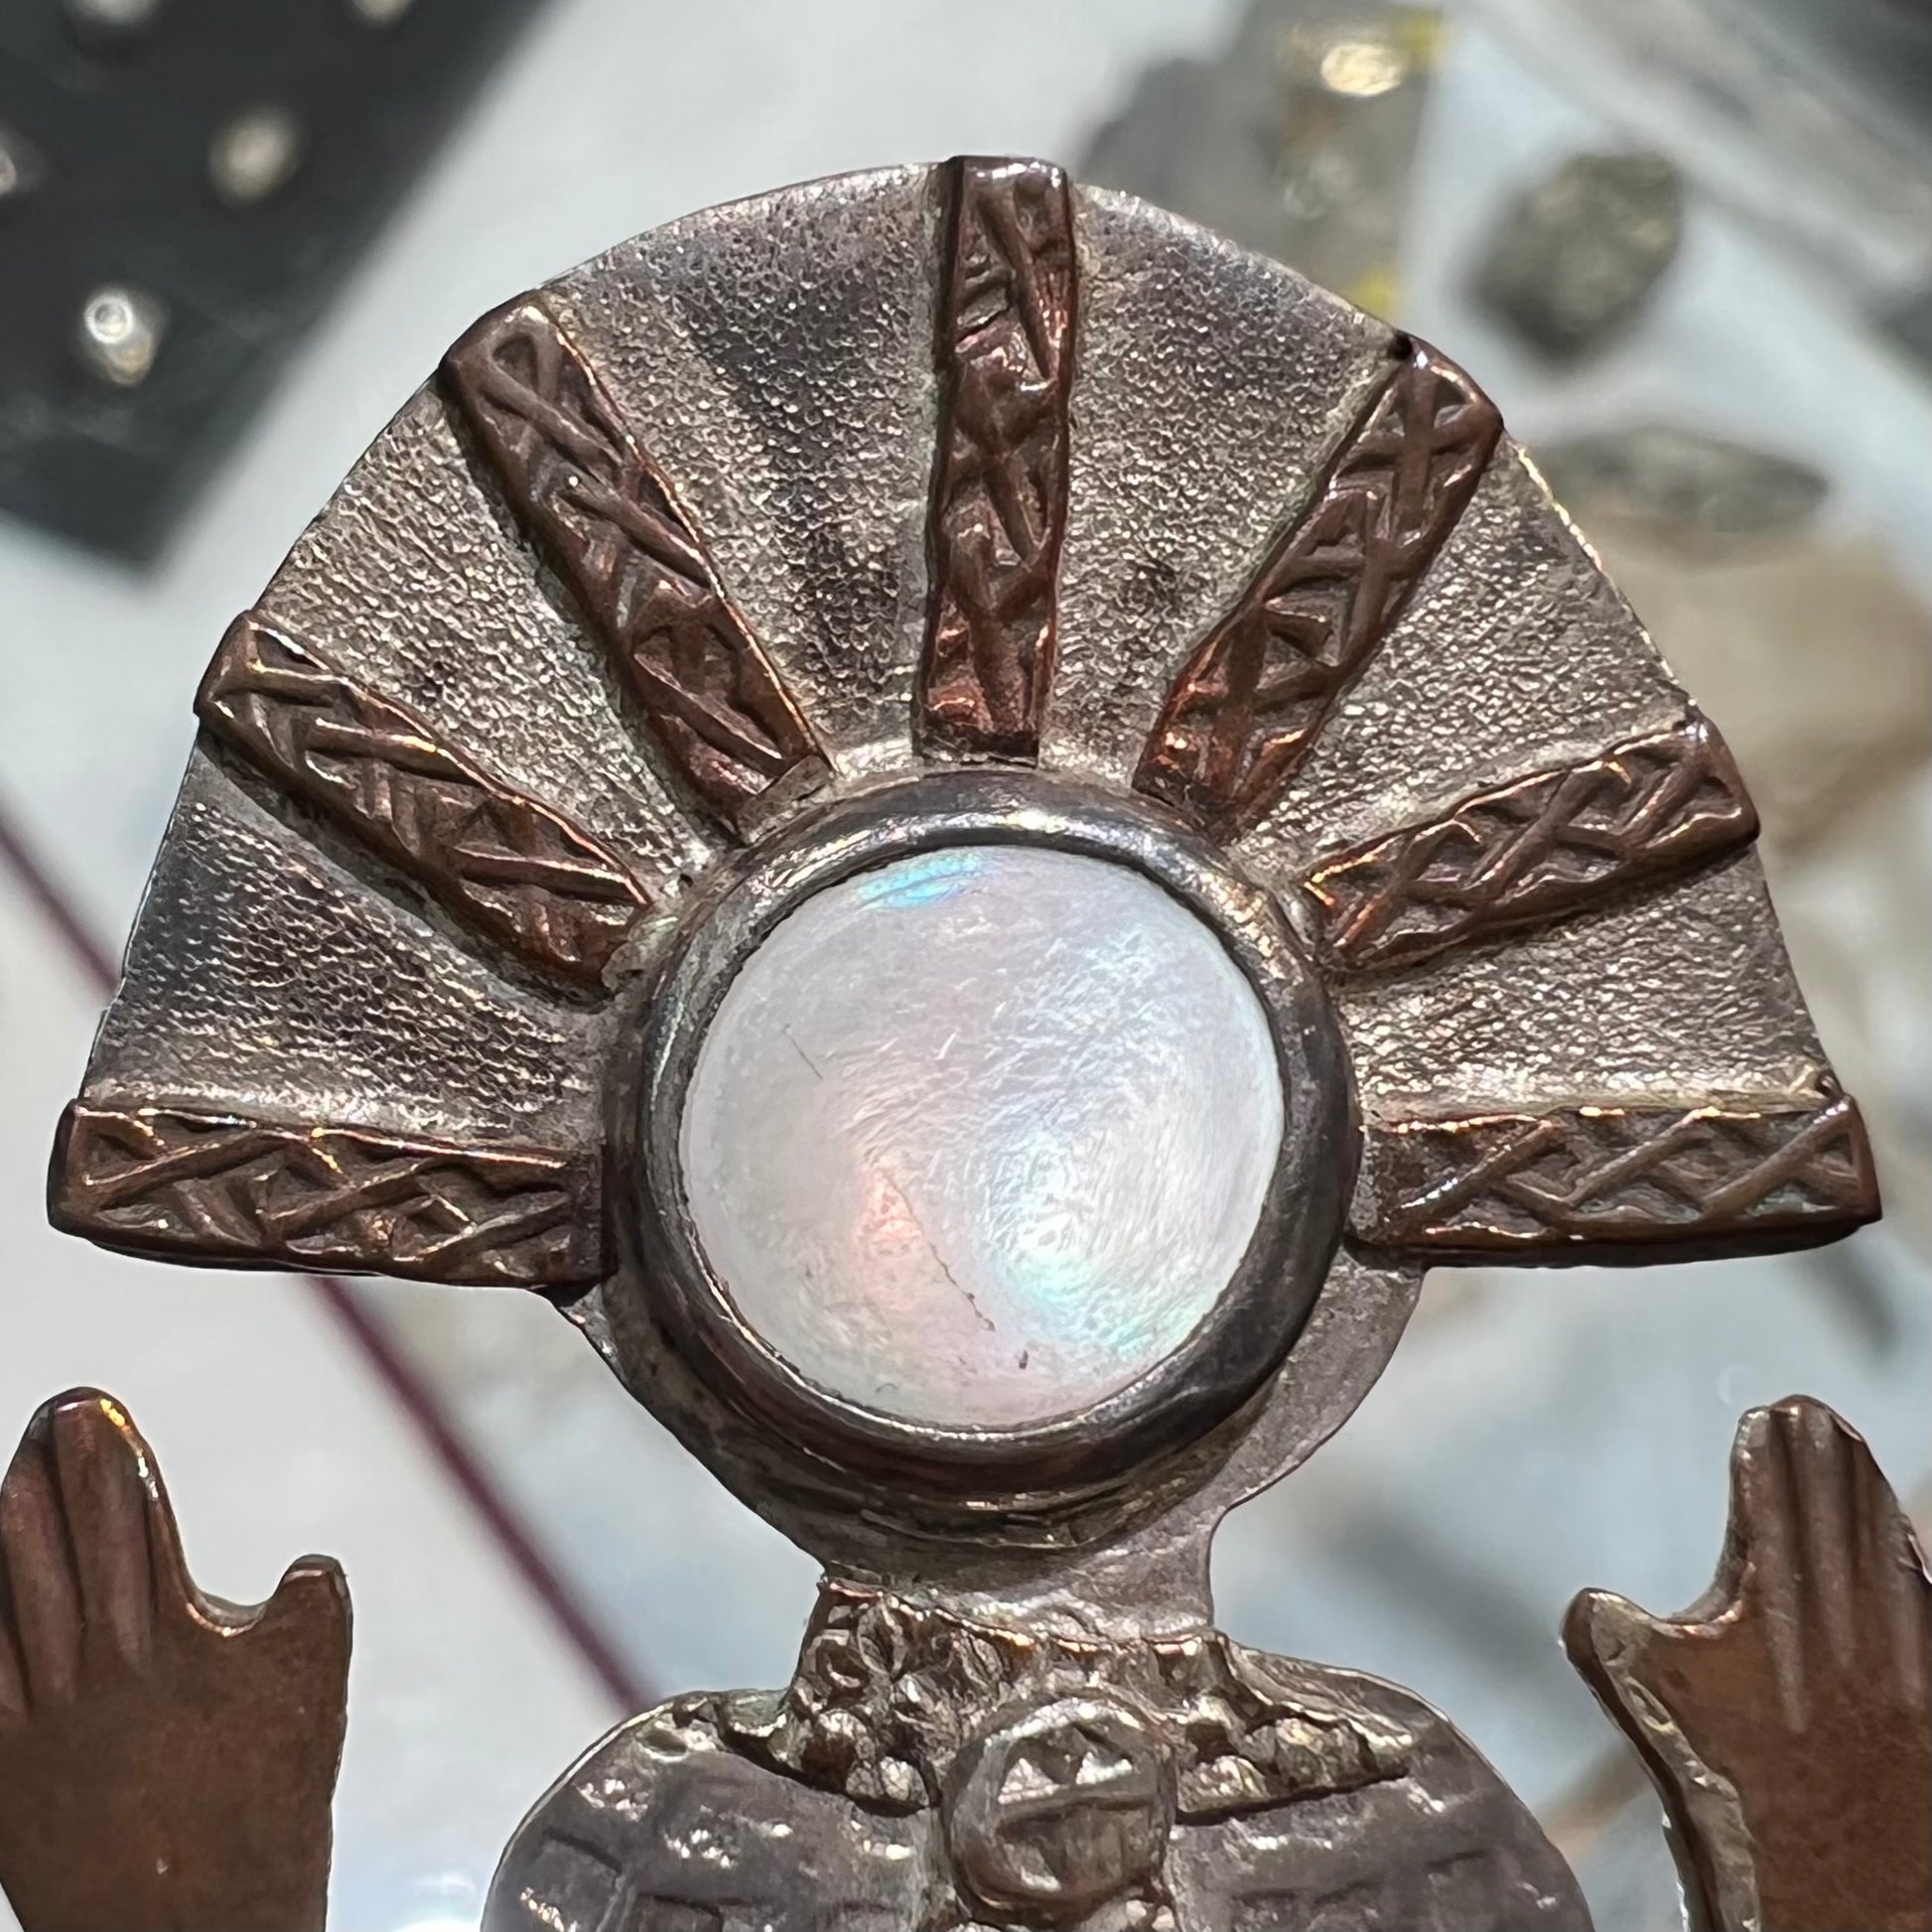 A handmade Navajo style silver pendant with copper highlights shaped like a Navajo Indian shaman.  There is a mother of pearl set as the shaman's face.